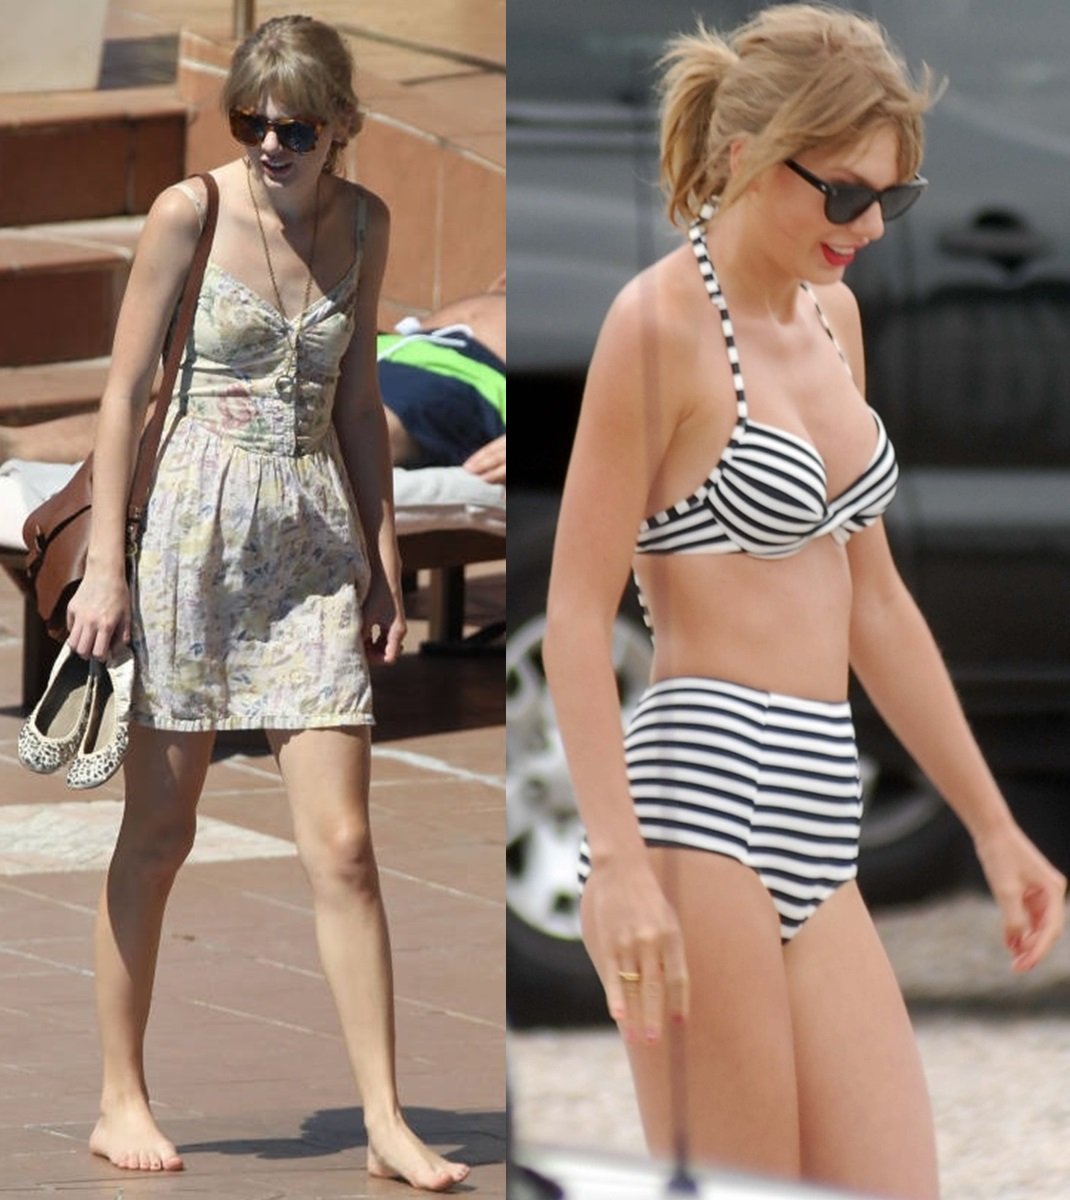 The Definitive Guide To Taylor Swift’s Fake Tits